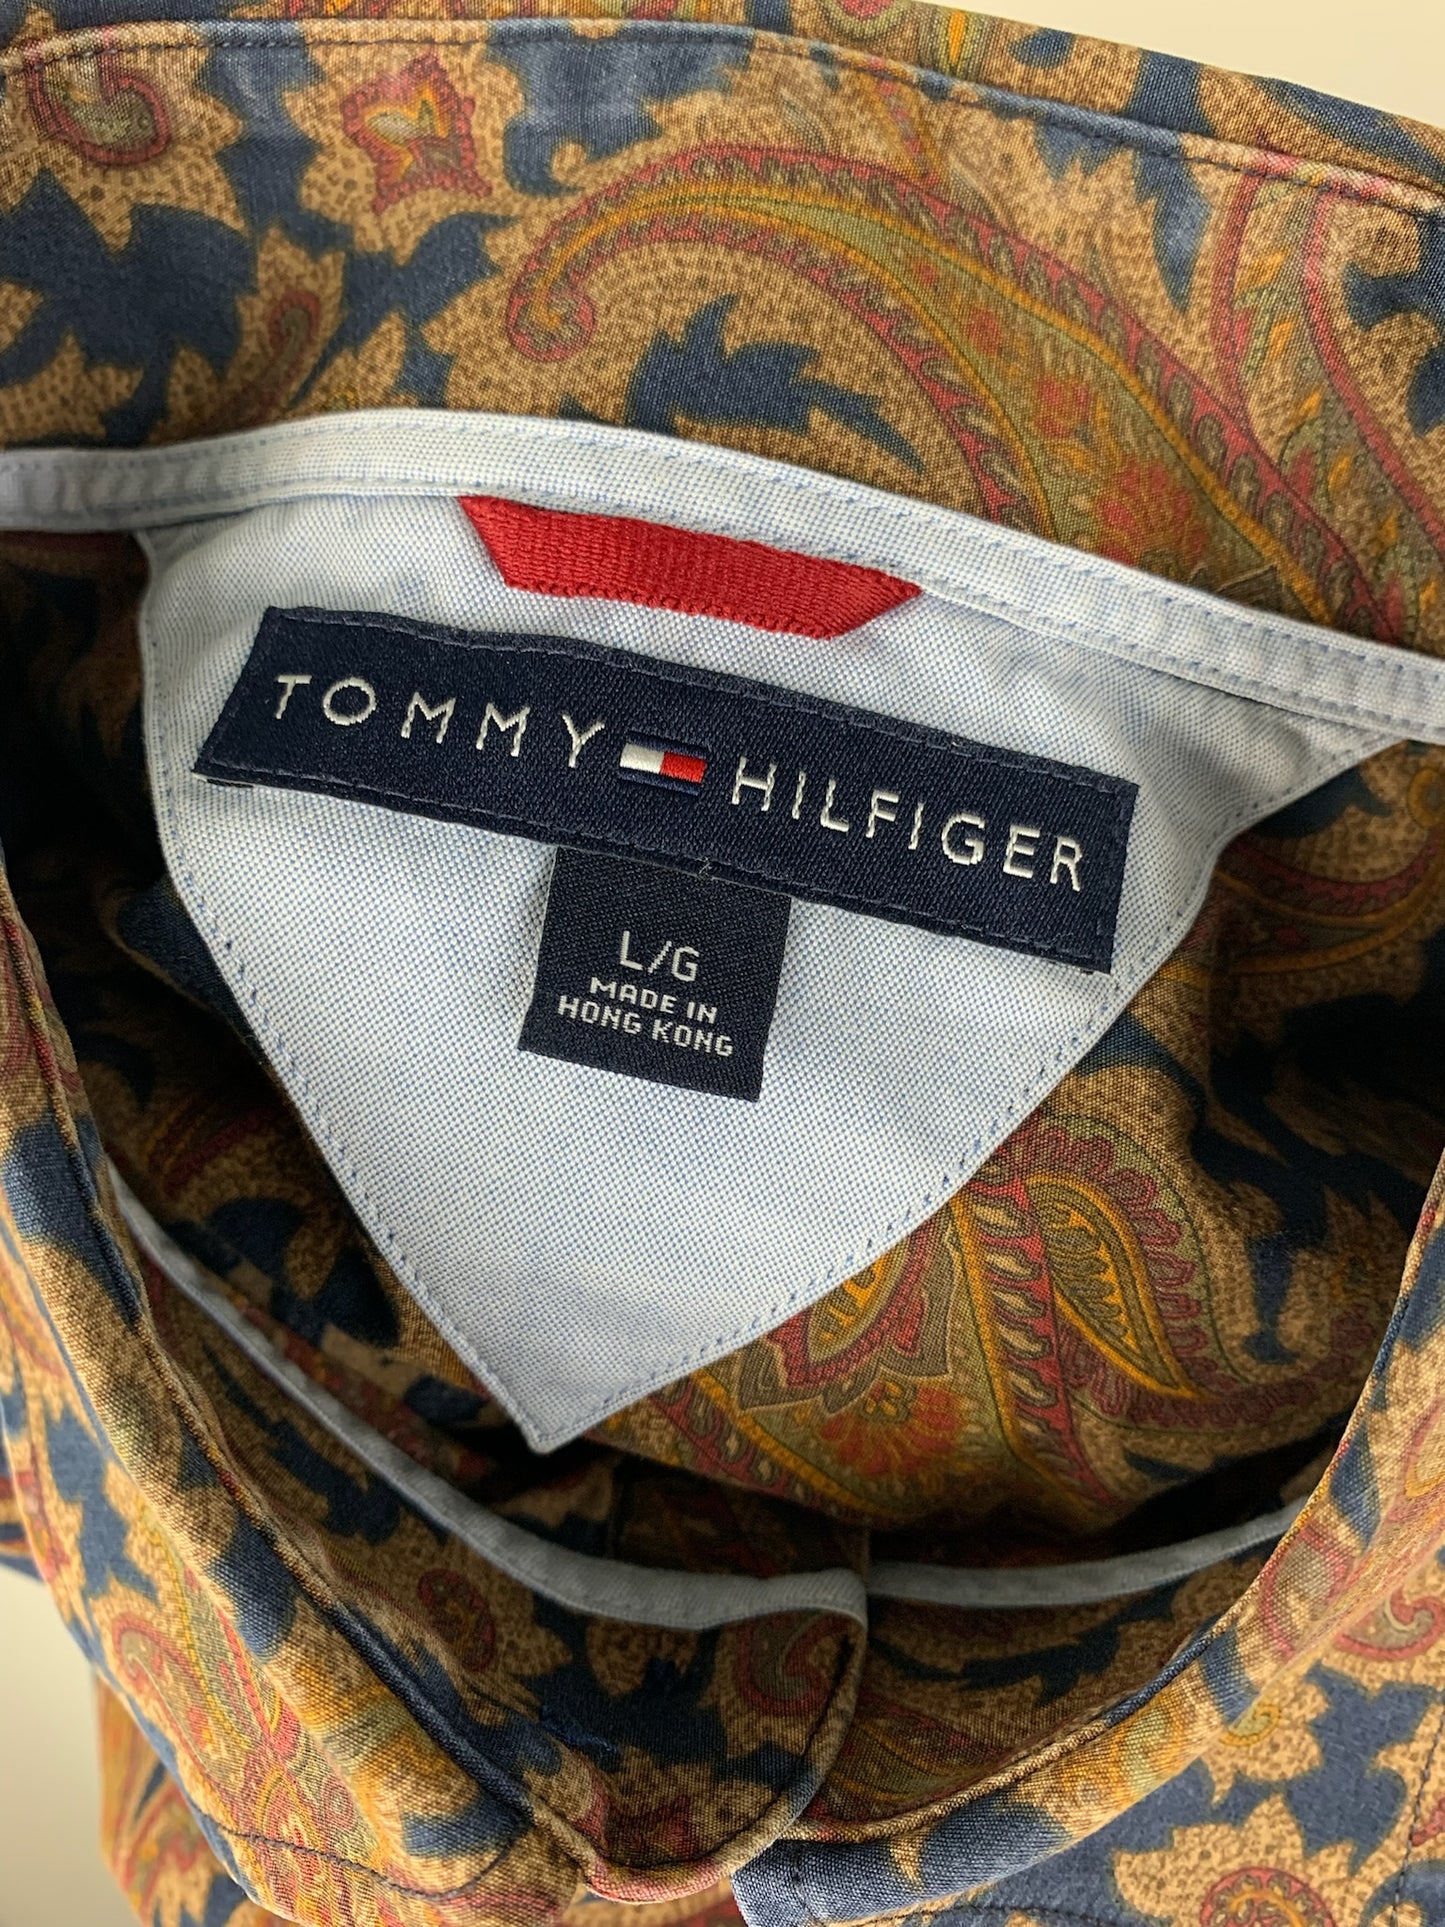 Dark Paisley by Tommy Hilfiger